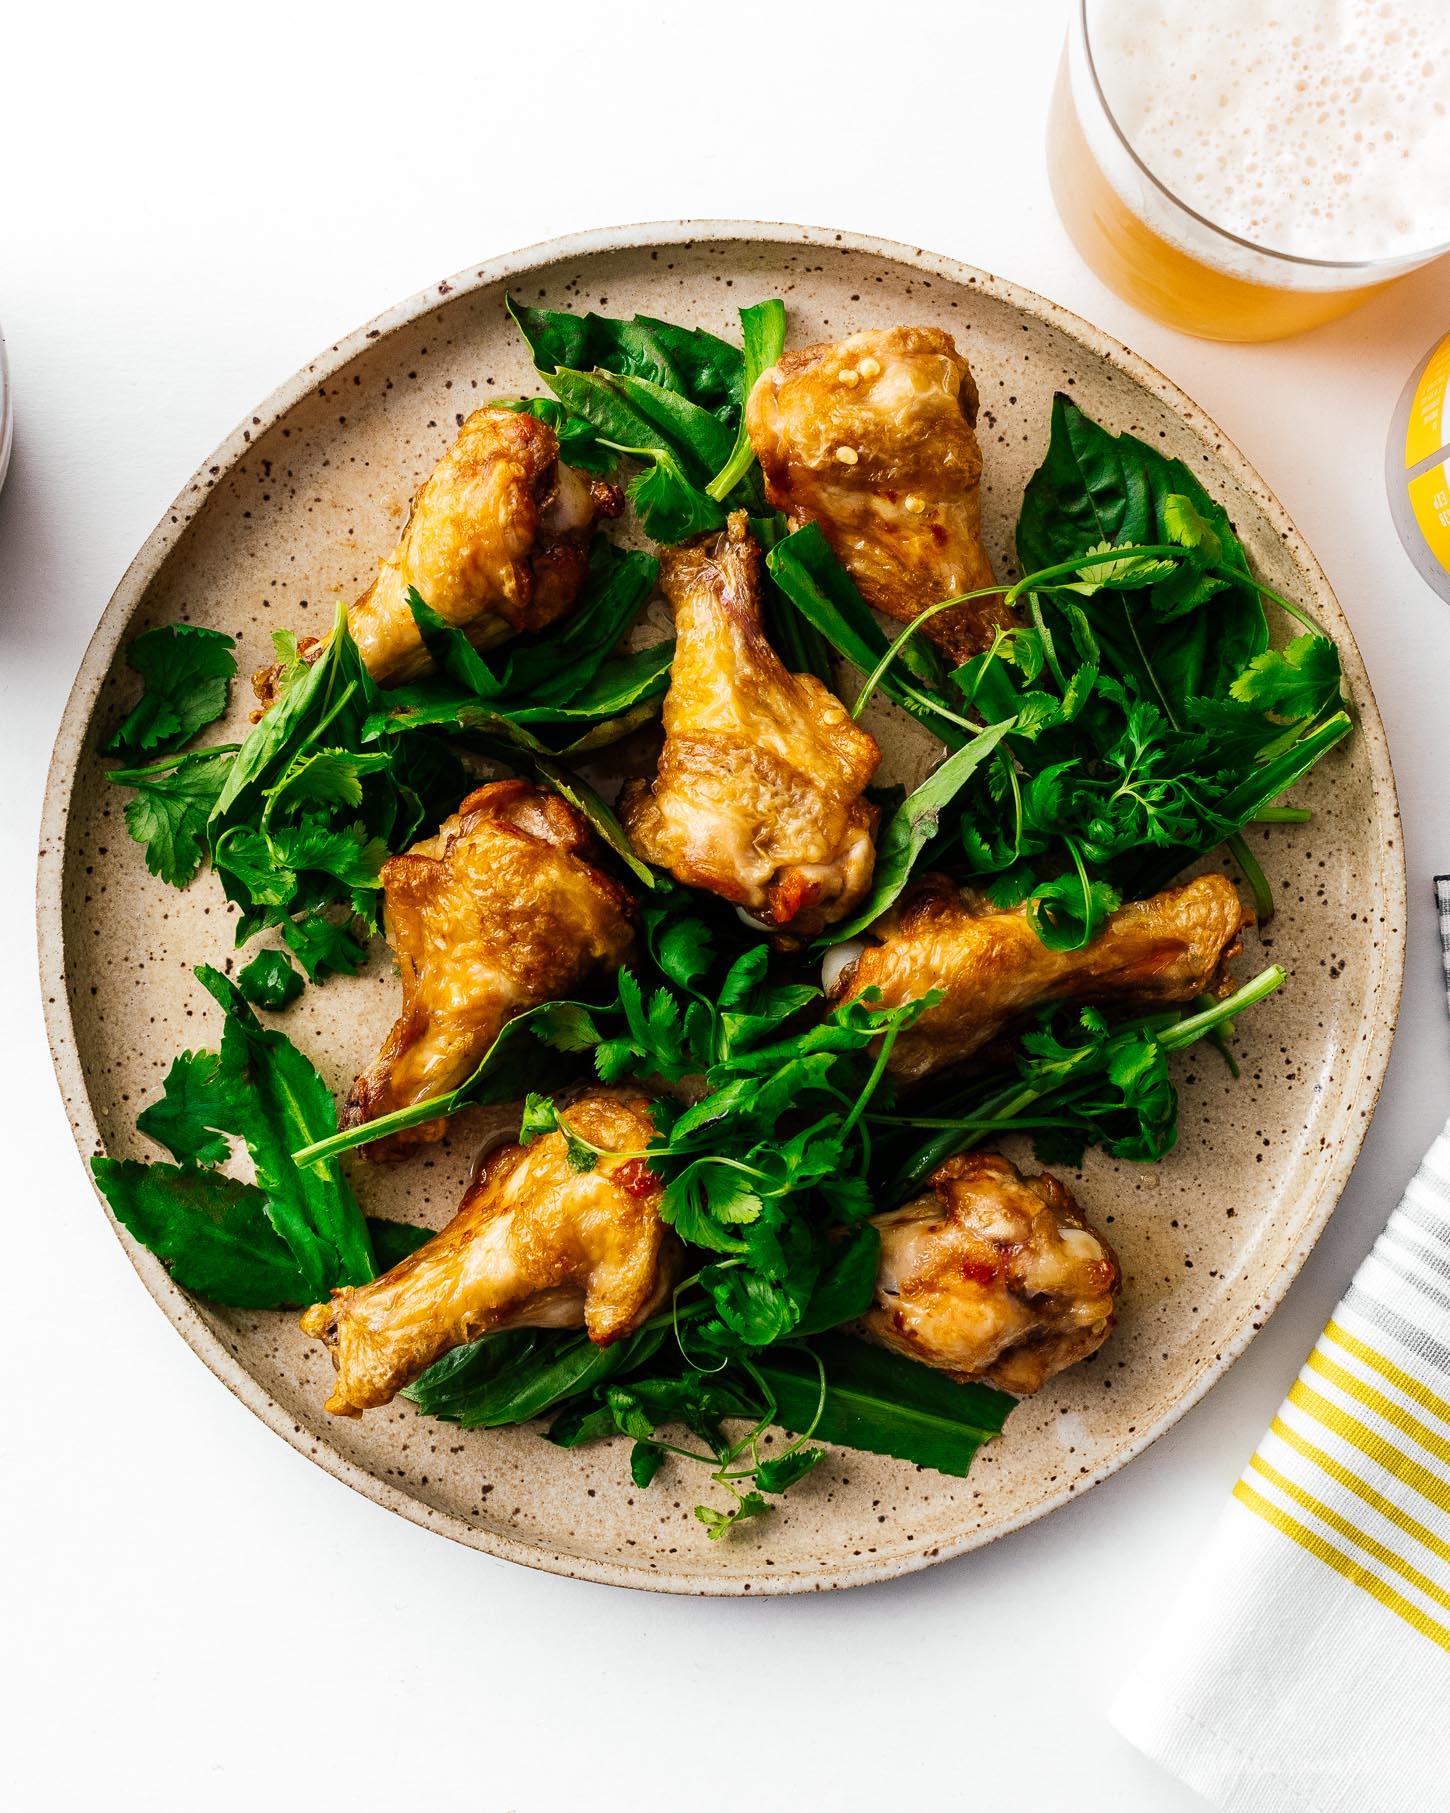 Air fryer chicken wings are so crispy and juicy you won’t believe they weren’t deep fried! Seriously good and so easy. Eat them naked, with salt and pepper, or toss them in a salty, sweet, sour Vietnamese fish sauce that will leave you begging for more. #airfryer #chickenwings #wings #airfryerwings #recipes #dinner #appies #vietnamesefood